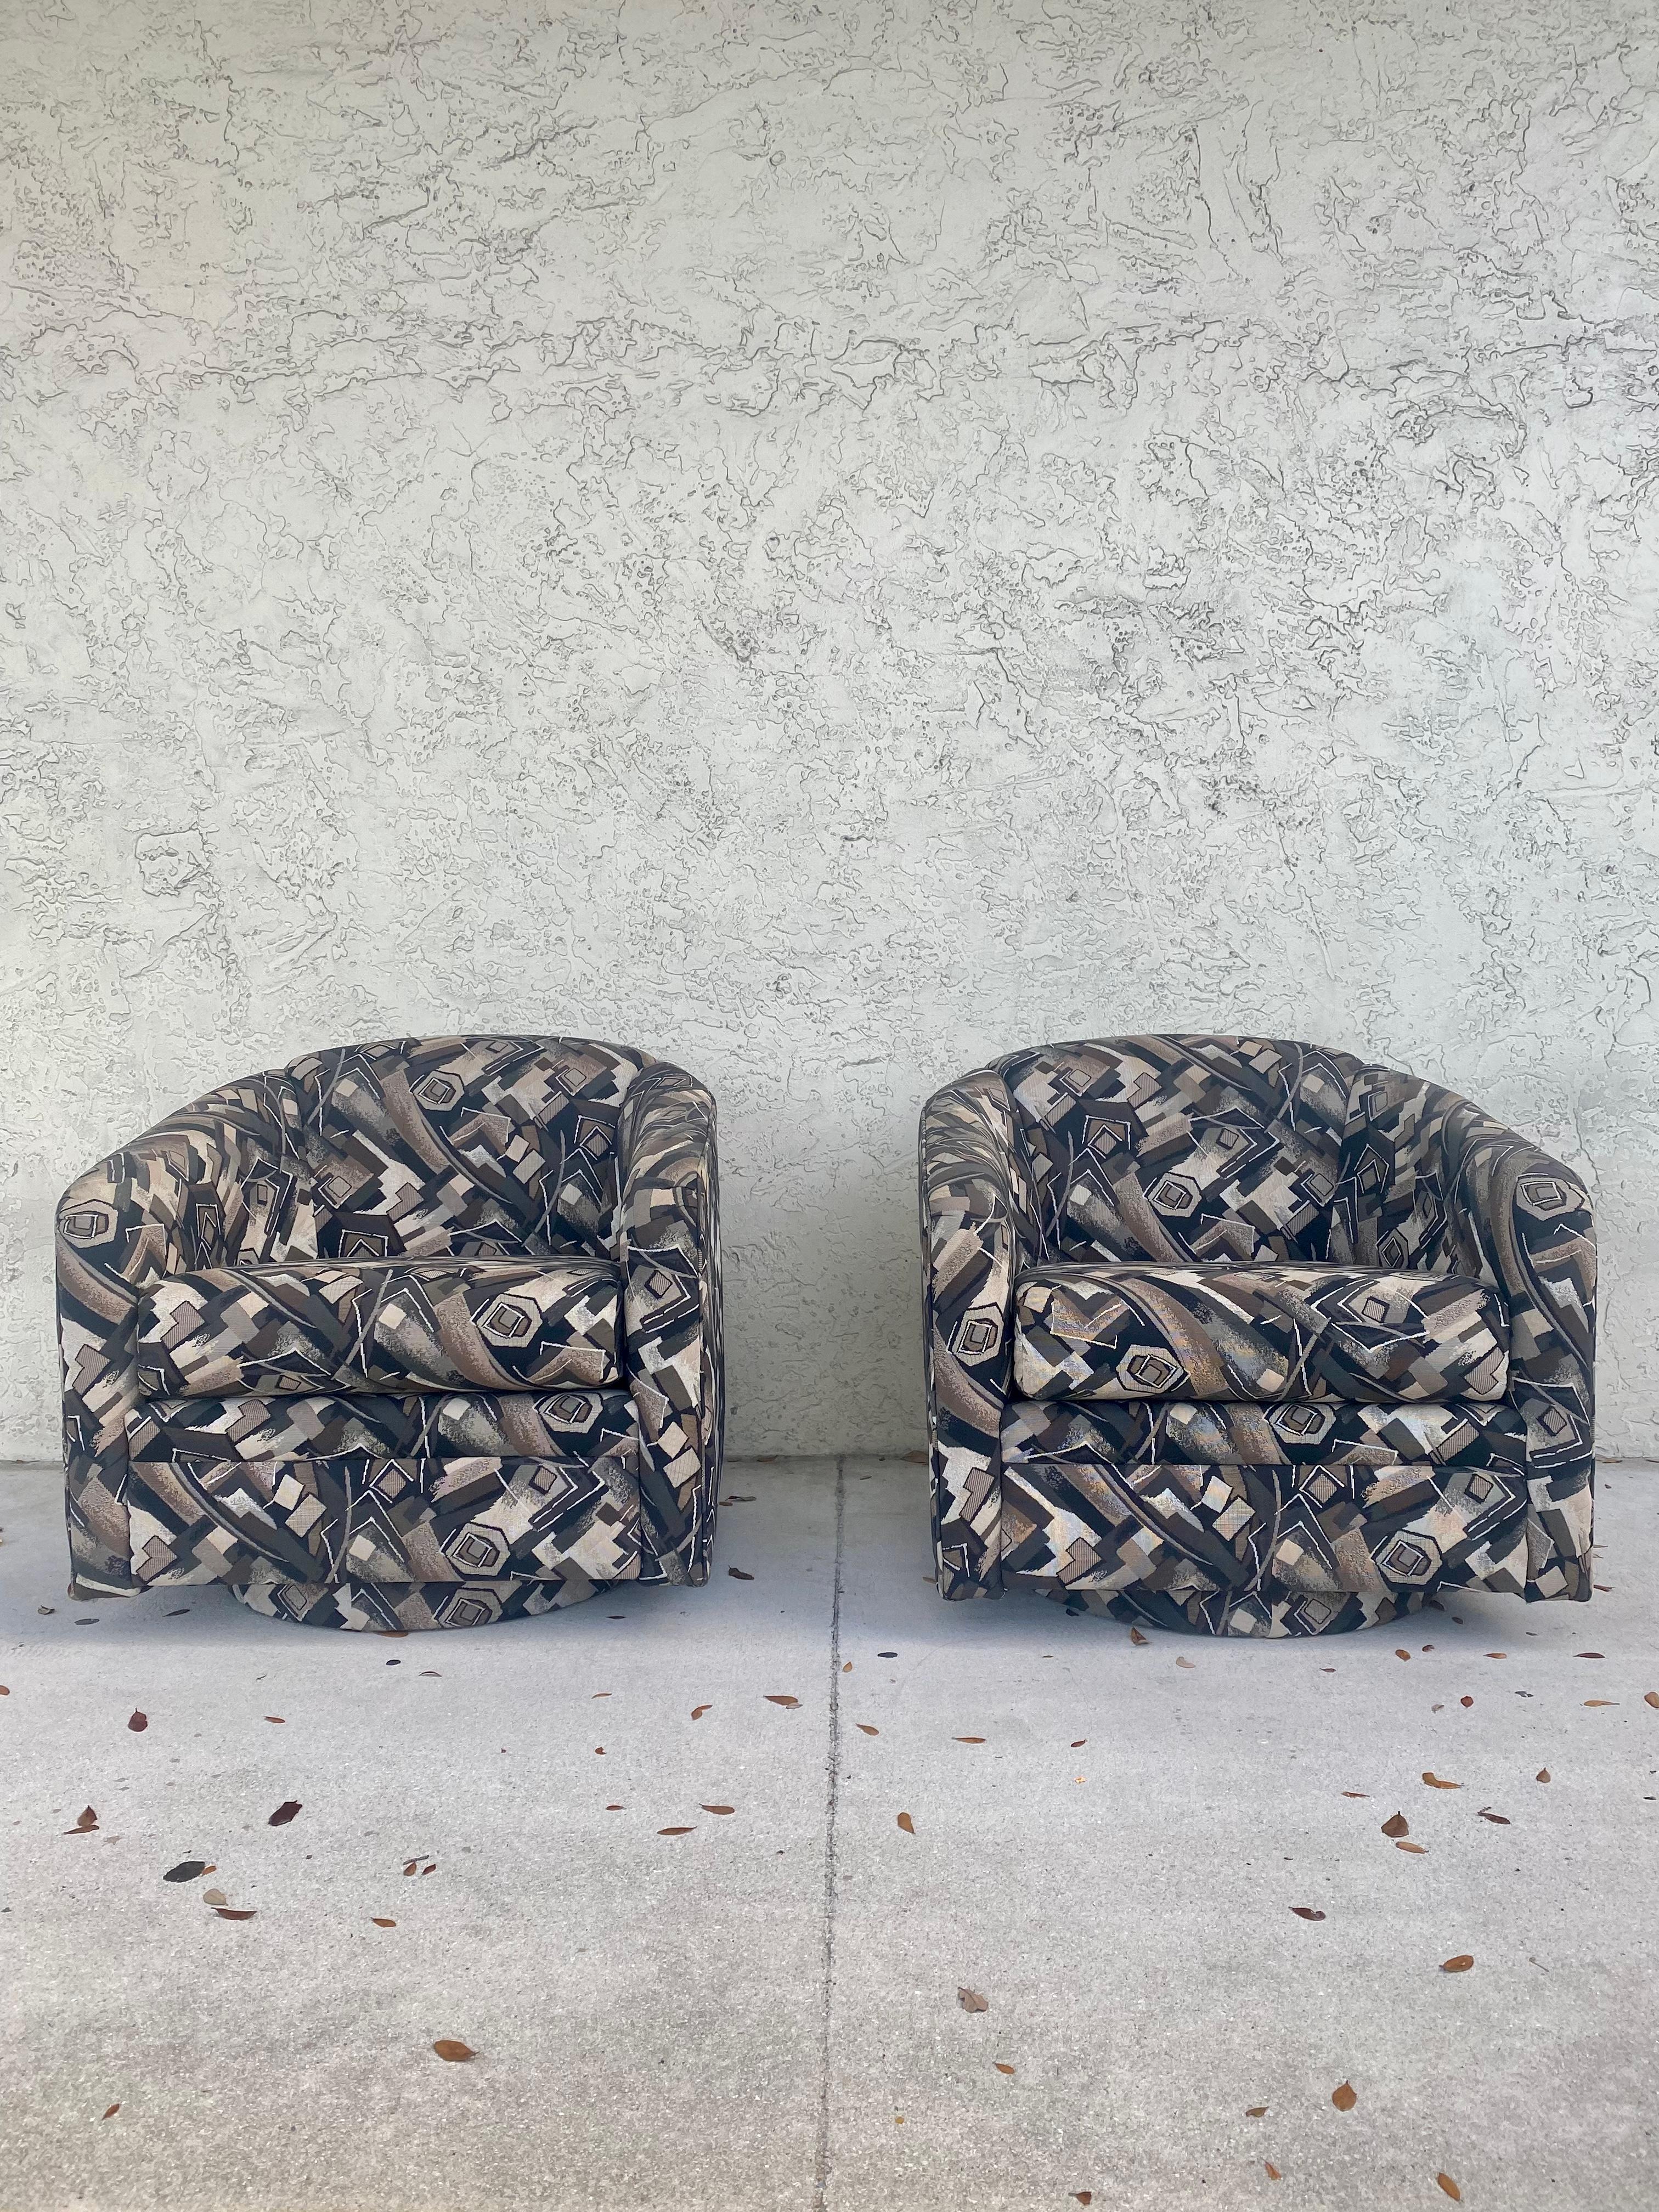 These Iconic stylish original upholstered swivel chairs are packed with personality! Outstanding design is exhibited throughout the monumental form. Post modern Memphis Style Swivel Chairs are beyond cool. Their beautiful and unique shape are